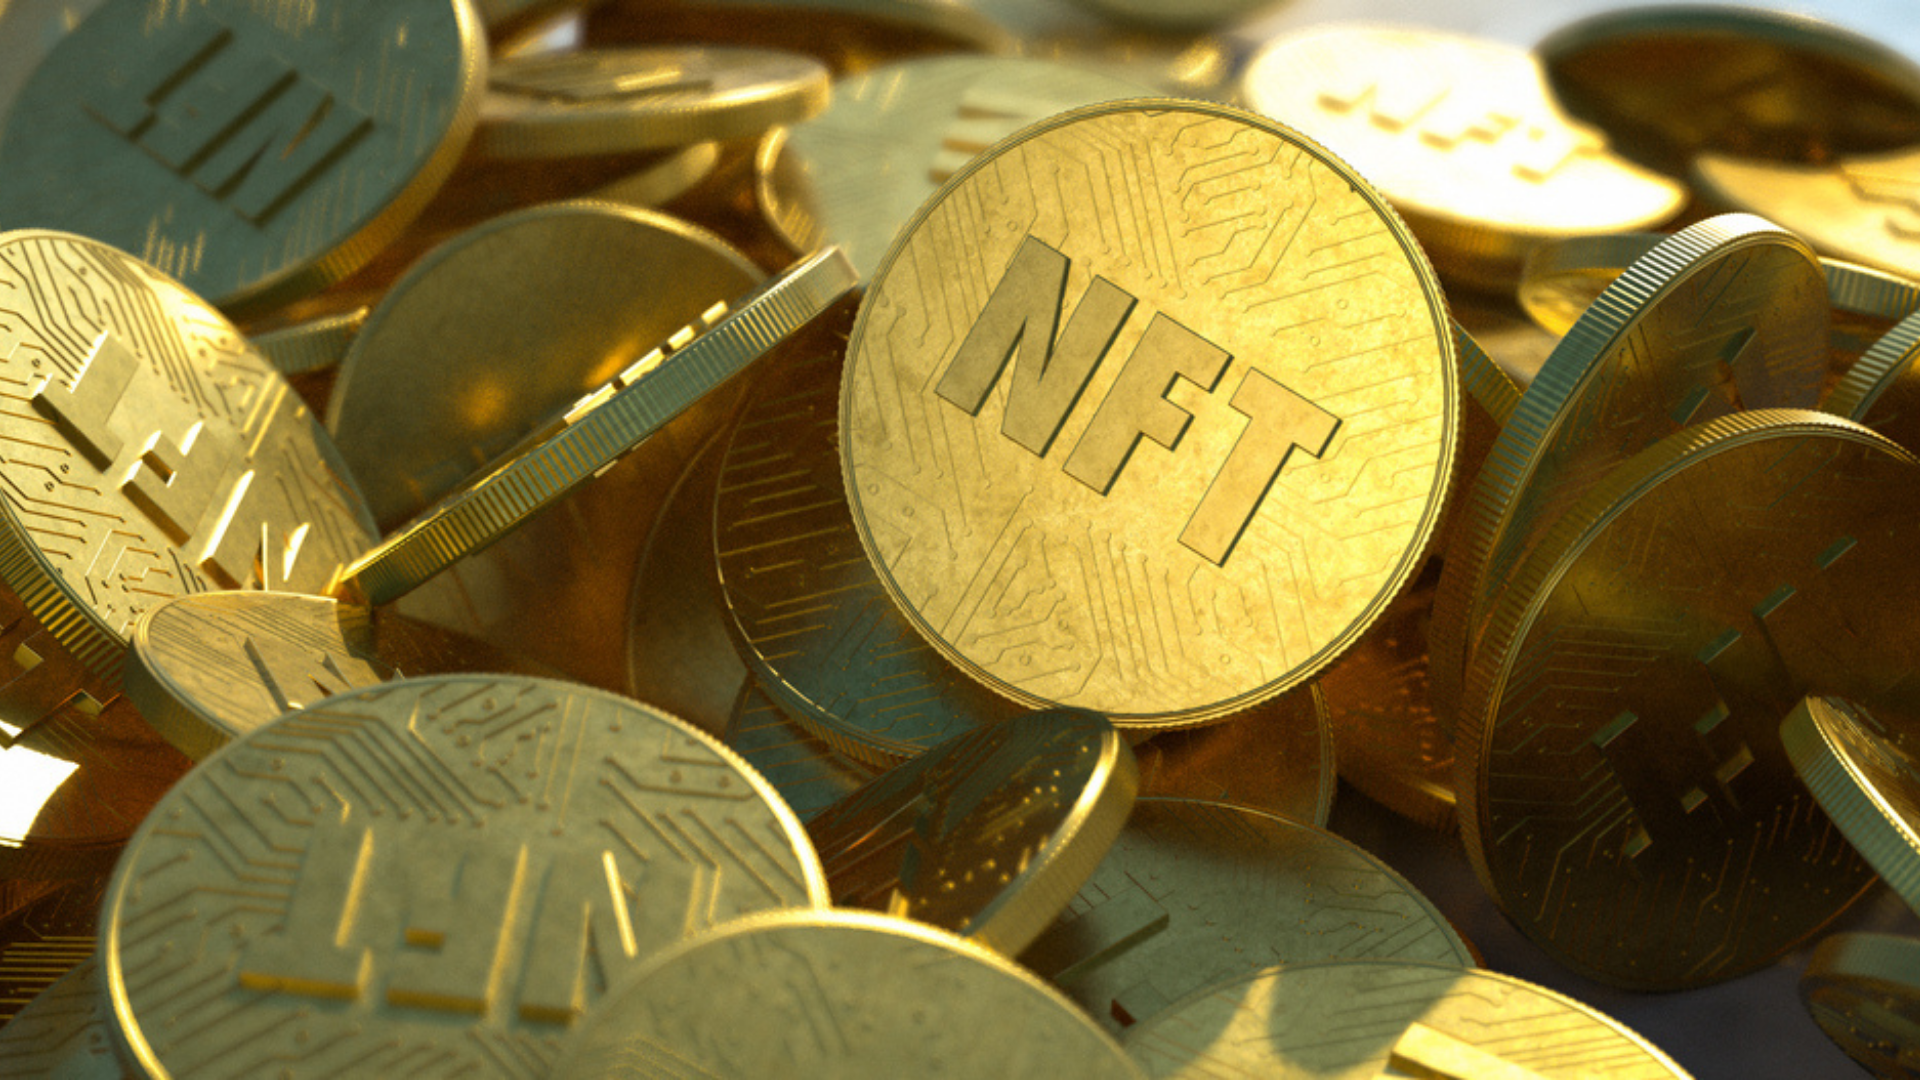 NFTs -non fungible tokens - gold coins, how to buy them